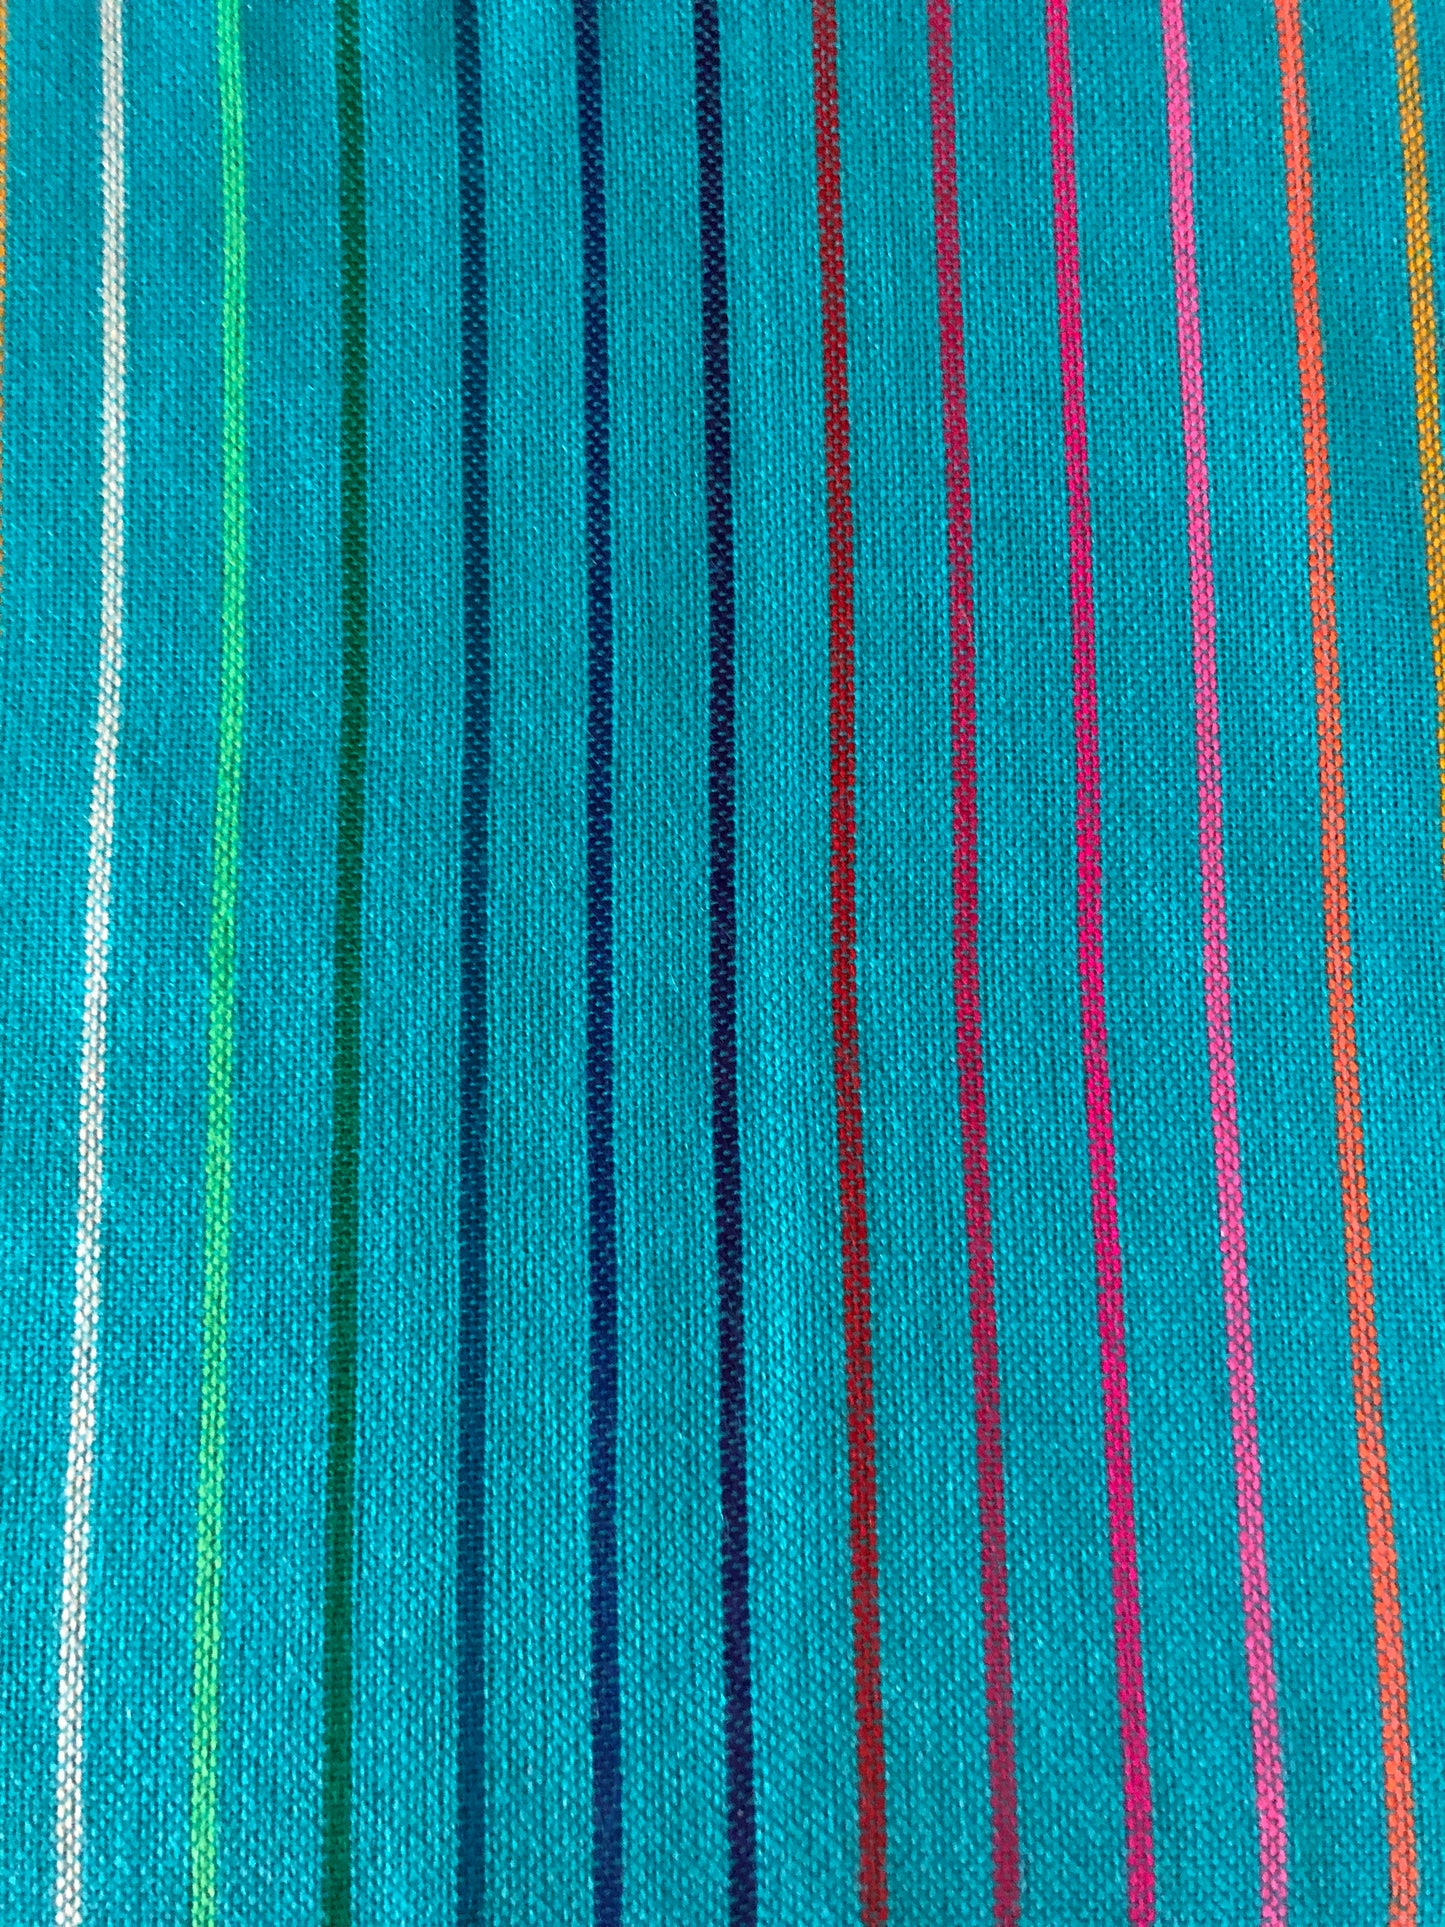 Mexican Fiesta Table Runner or Tablecloth -Turquoise striped